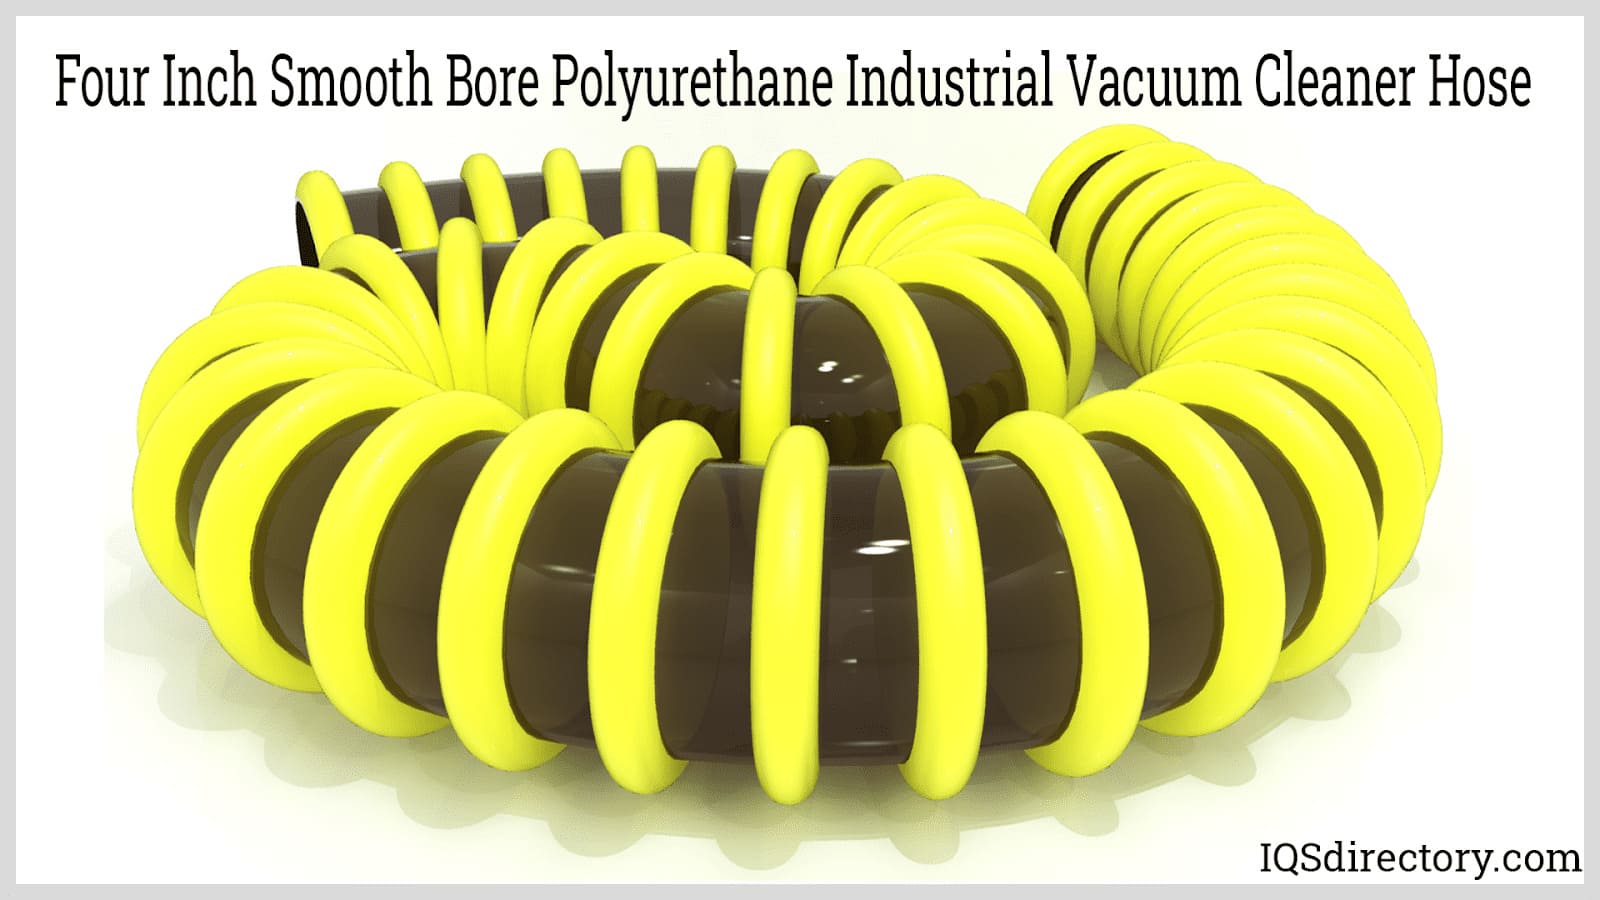 Four Inch Smooth Bore Polyurethane Industrial Vacuum Cleaner Hose